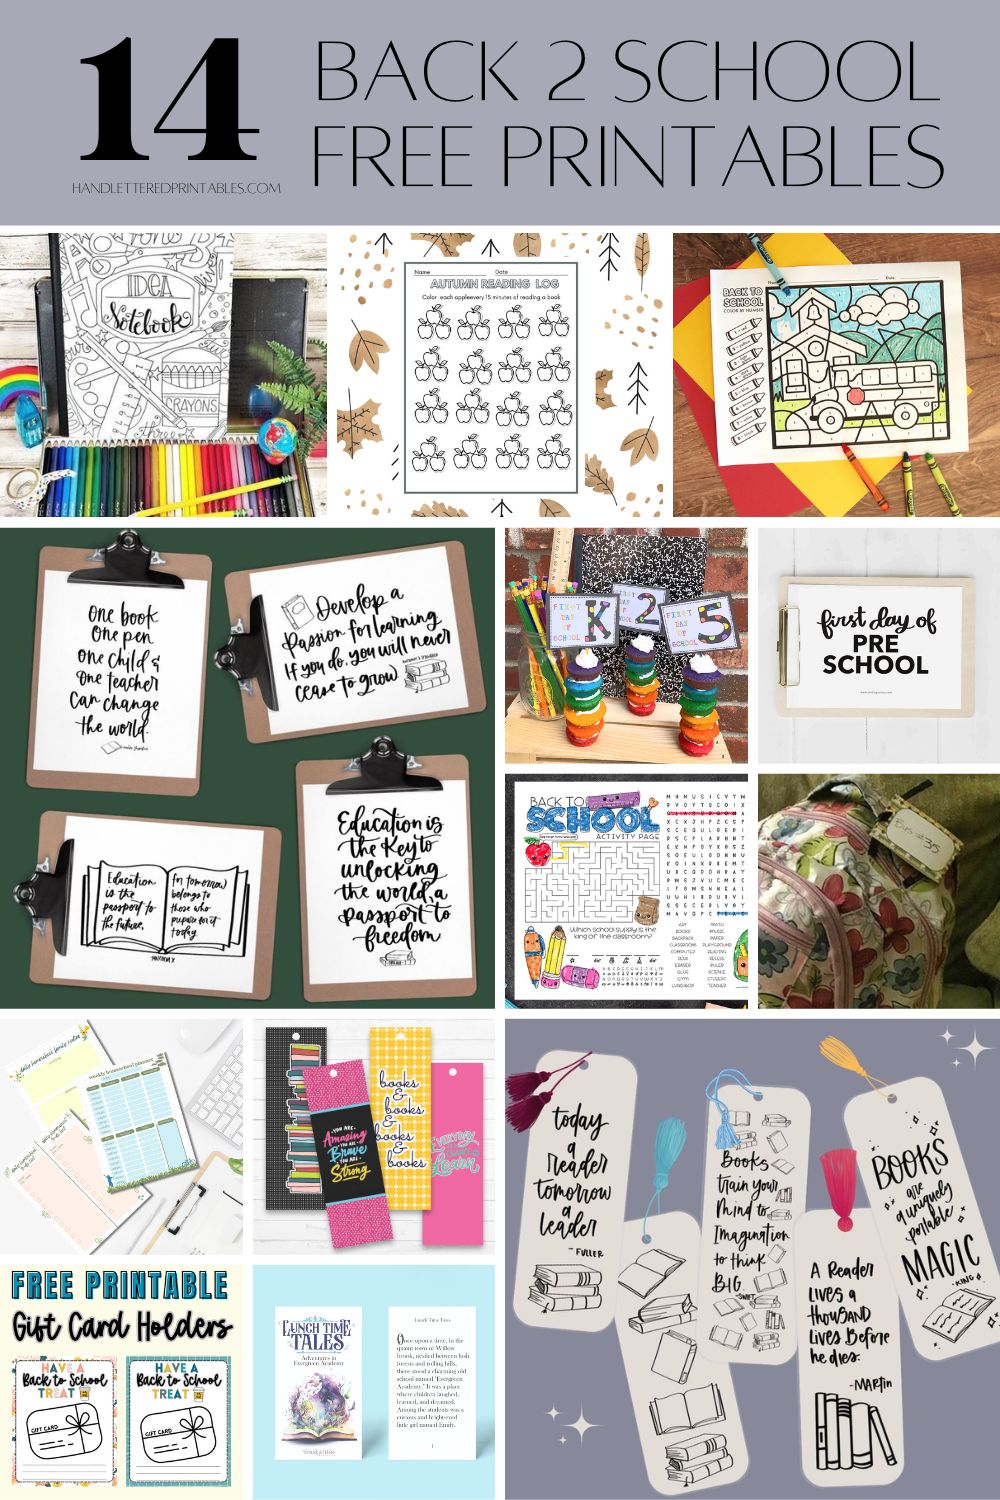 14 Free printables for back to school (collage of all printables printed out)